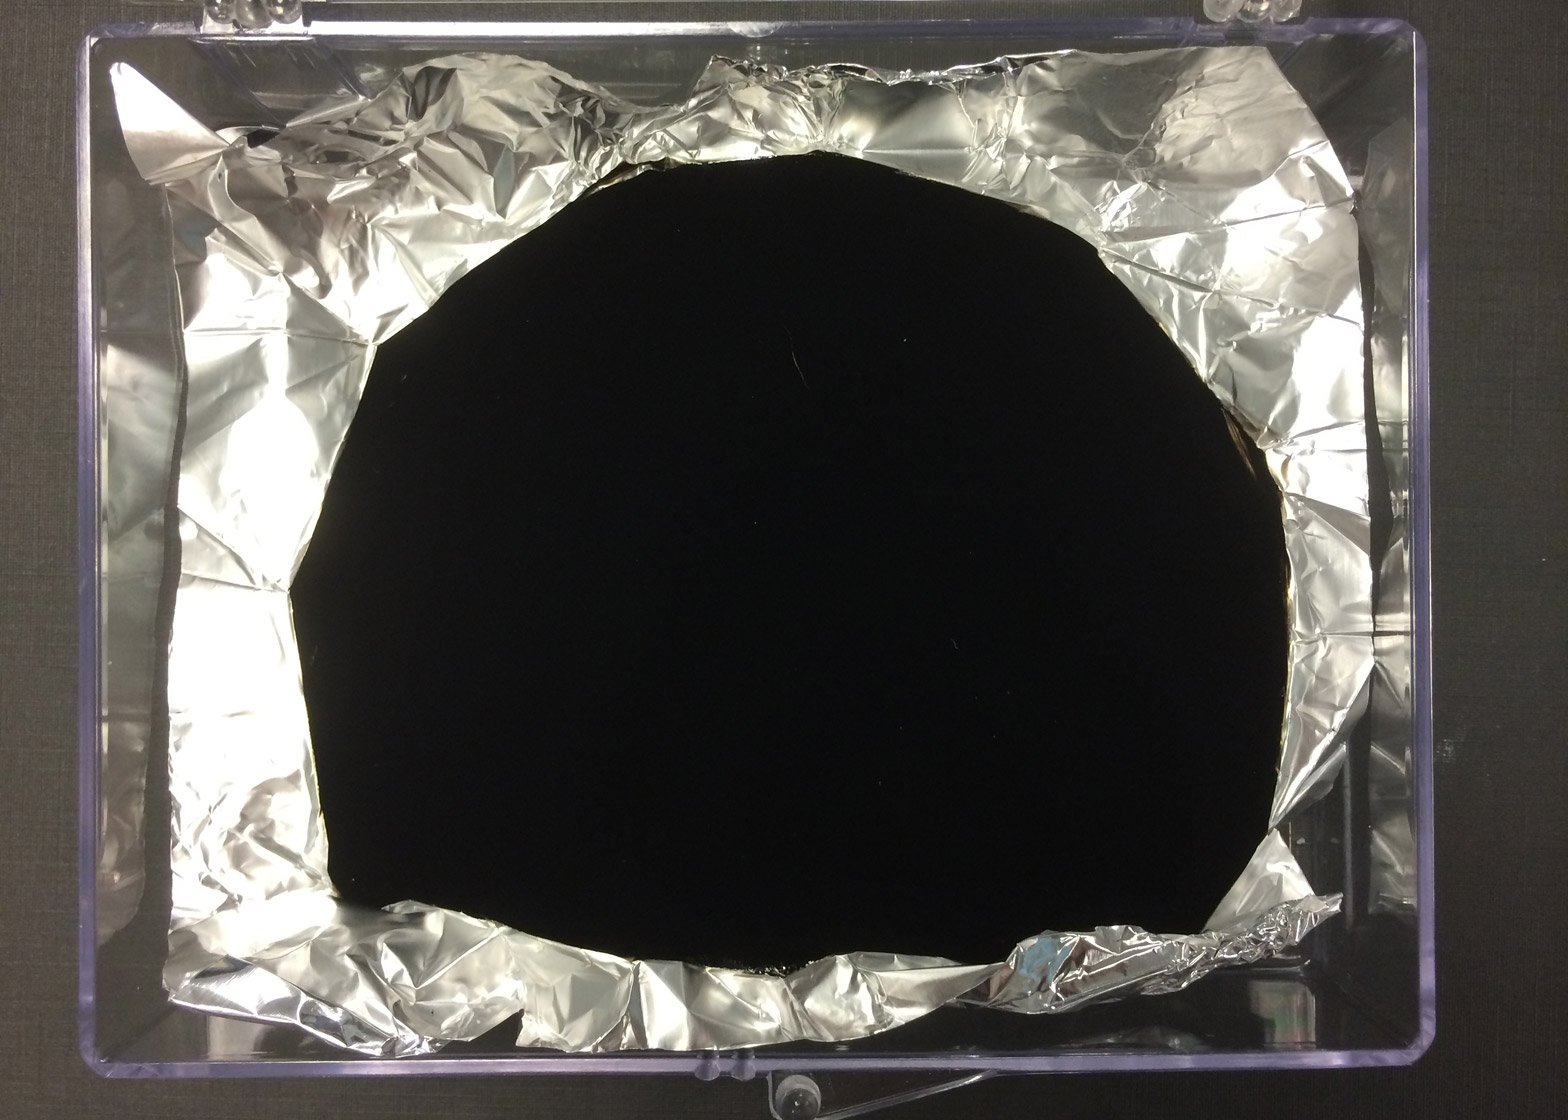 Anish Kapoor gets rights to blackest pigment